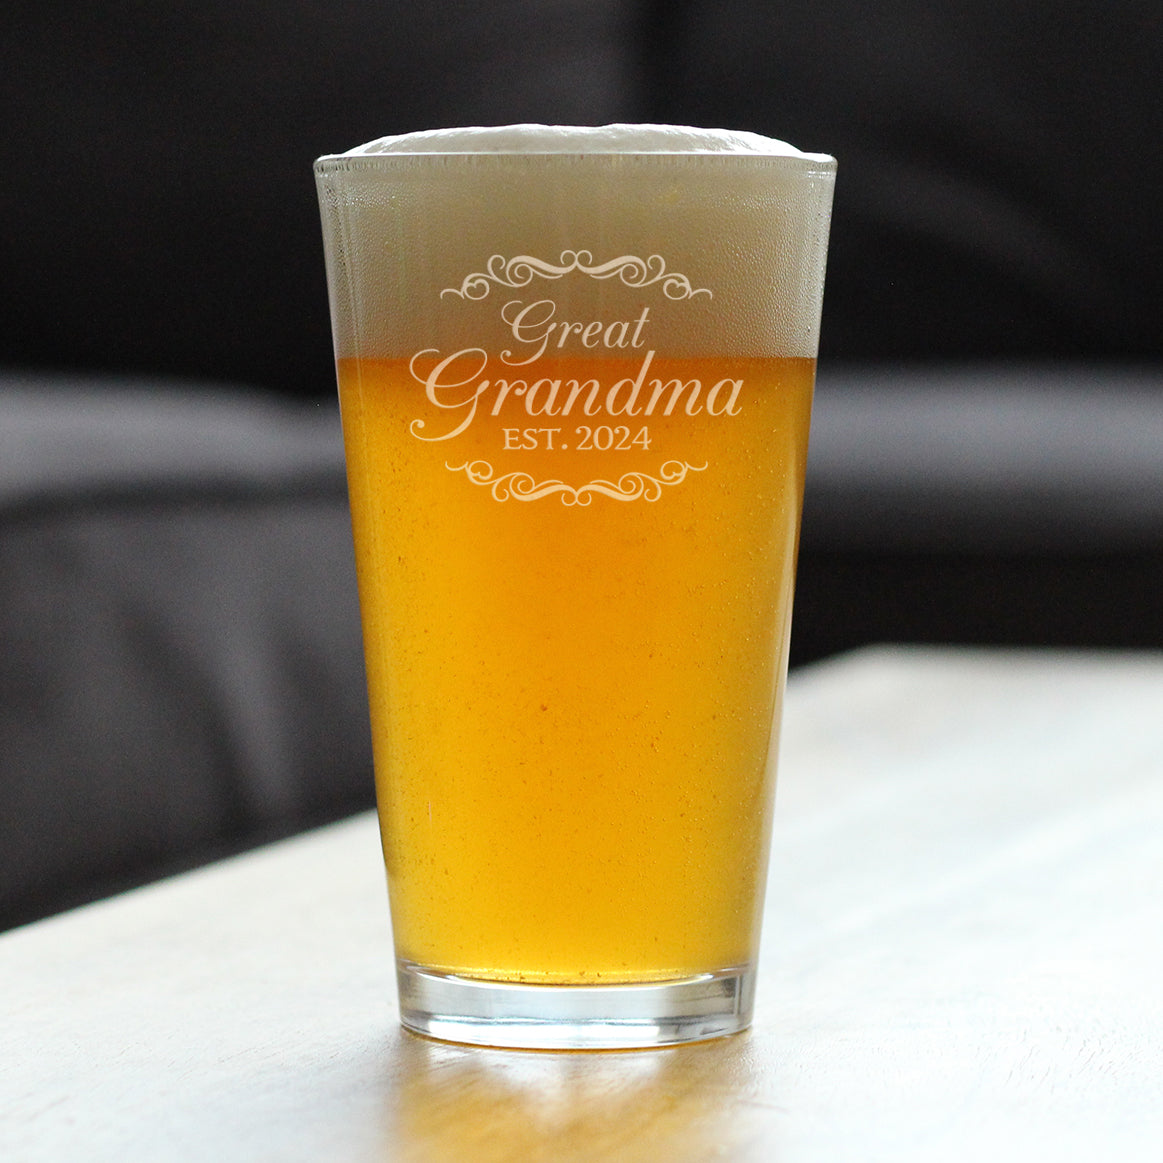 Great Grandma Est 2024 - New Great Grandmother Pint Glass Gift for First Time Great Grandparents - Decorative 16 Oz Glasses